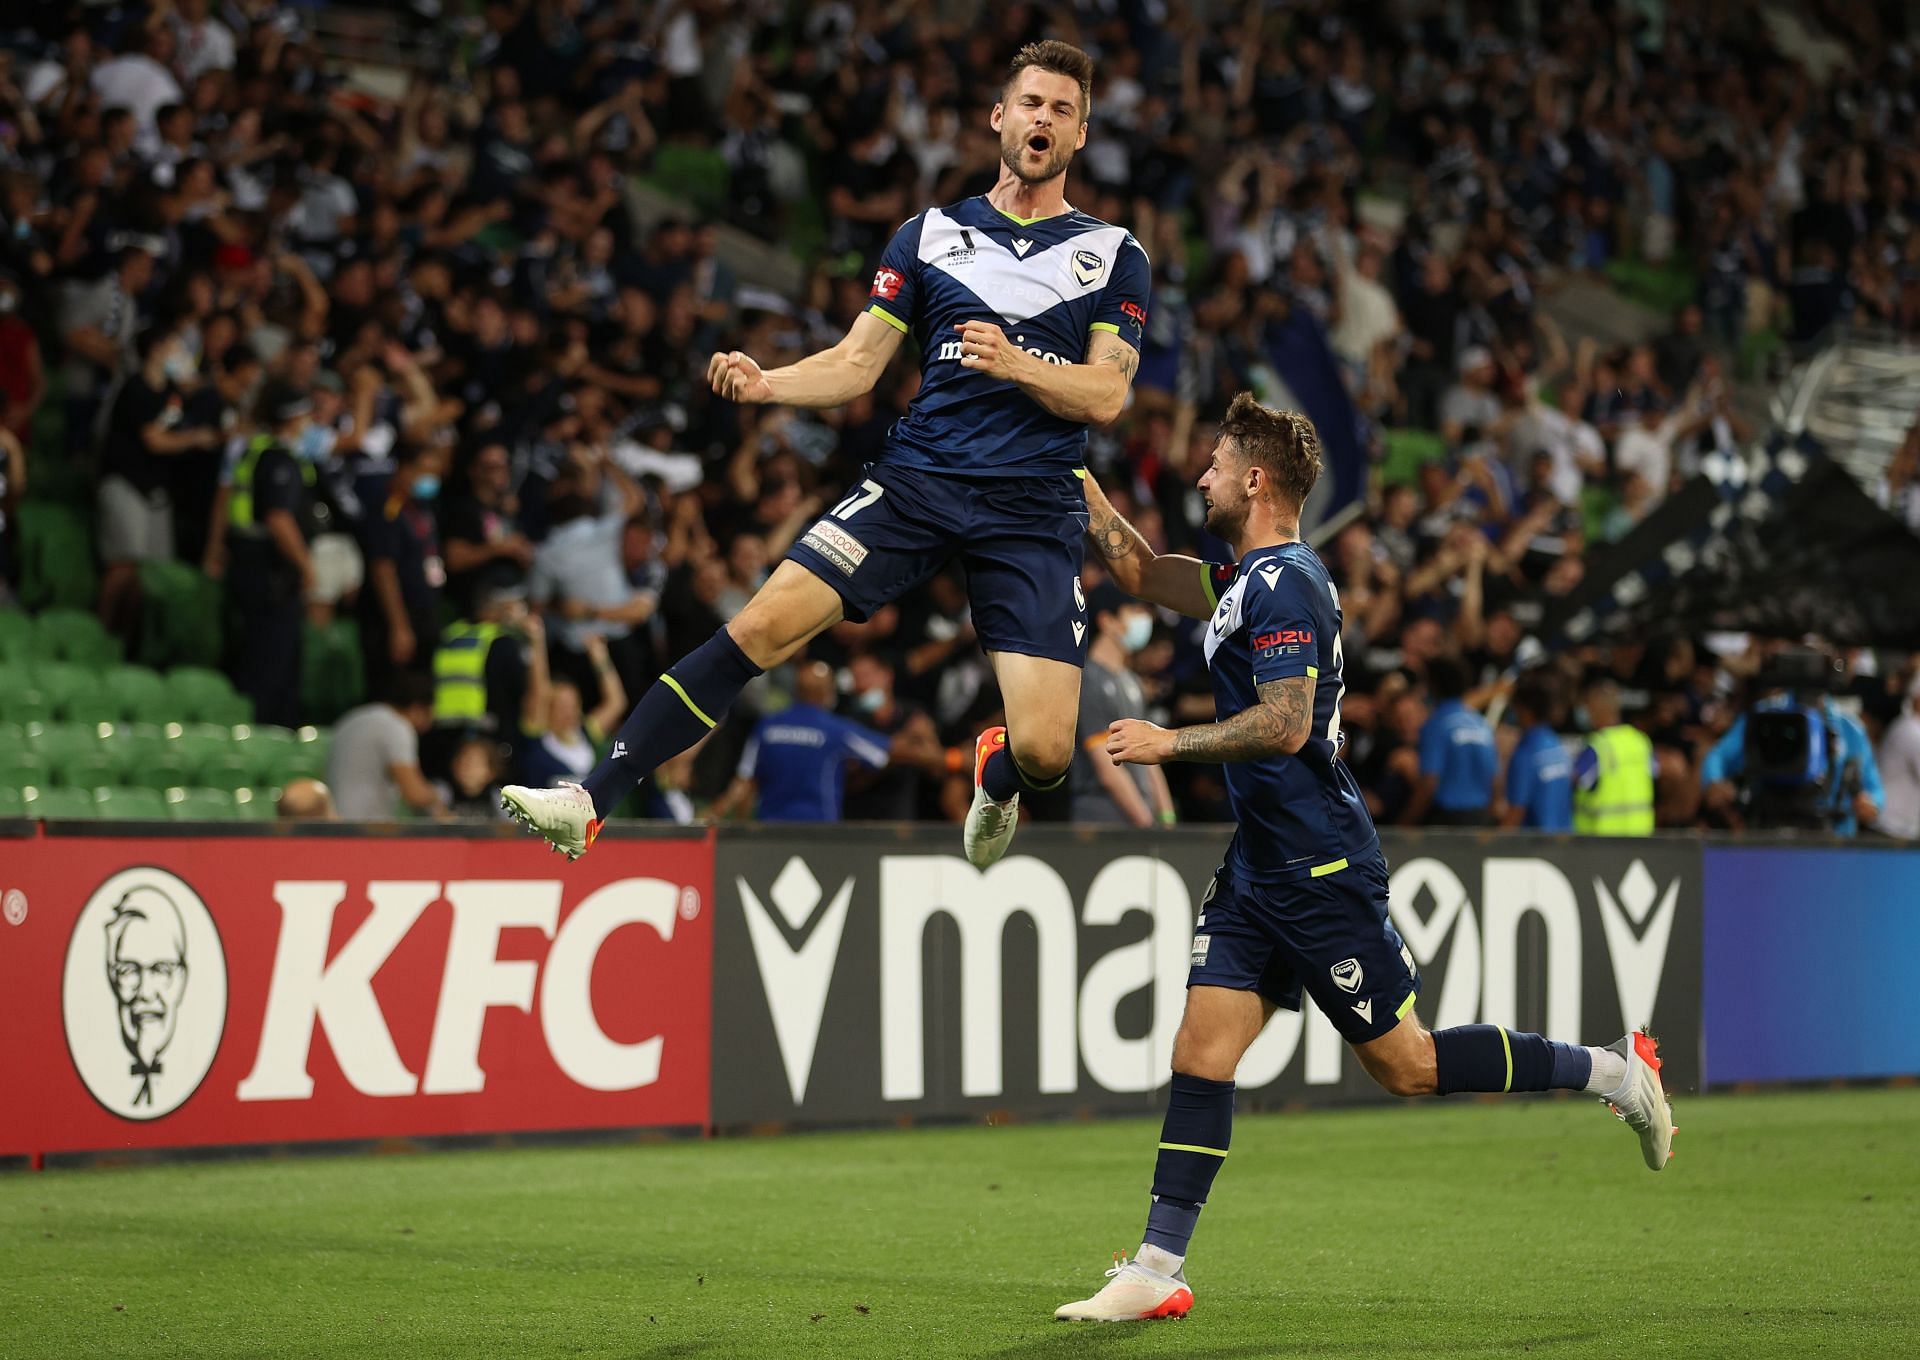 Melbourne Victory will face Brisbane Roar on Friday